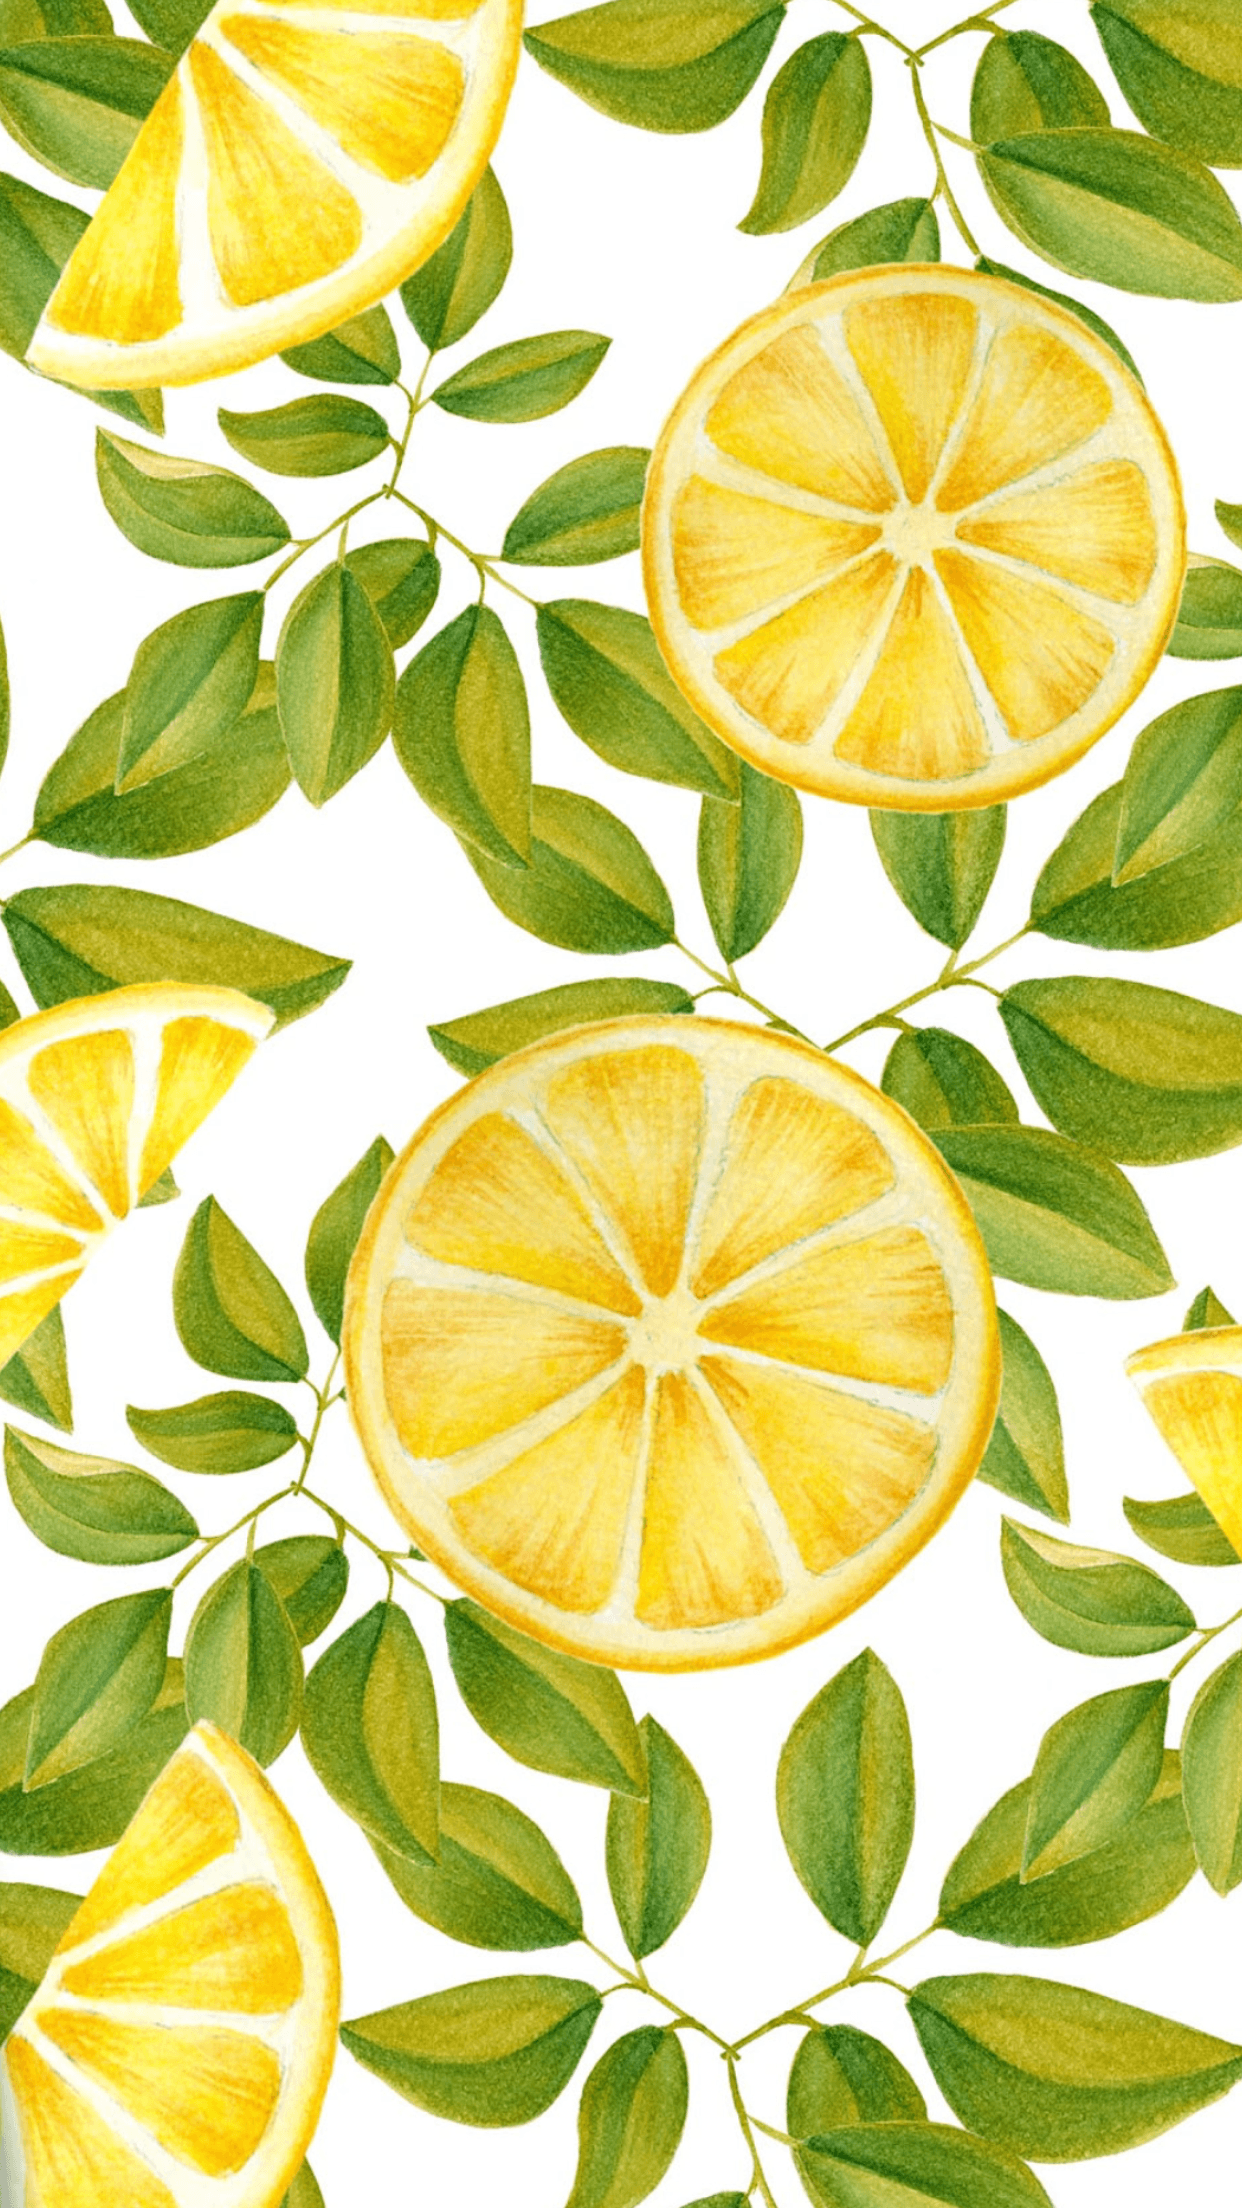 A pattern of yellow lemon slices and green leaves on a white background - Lemon